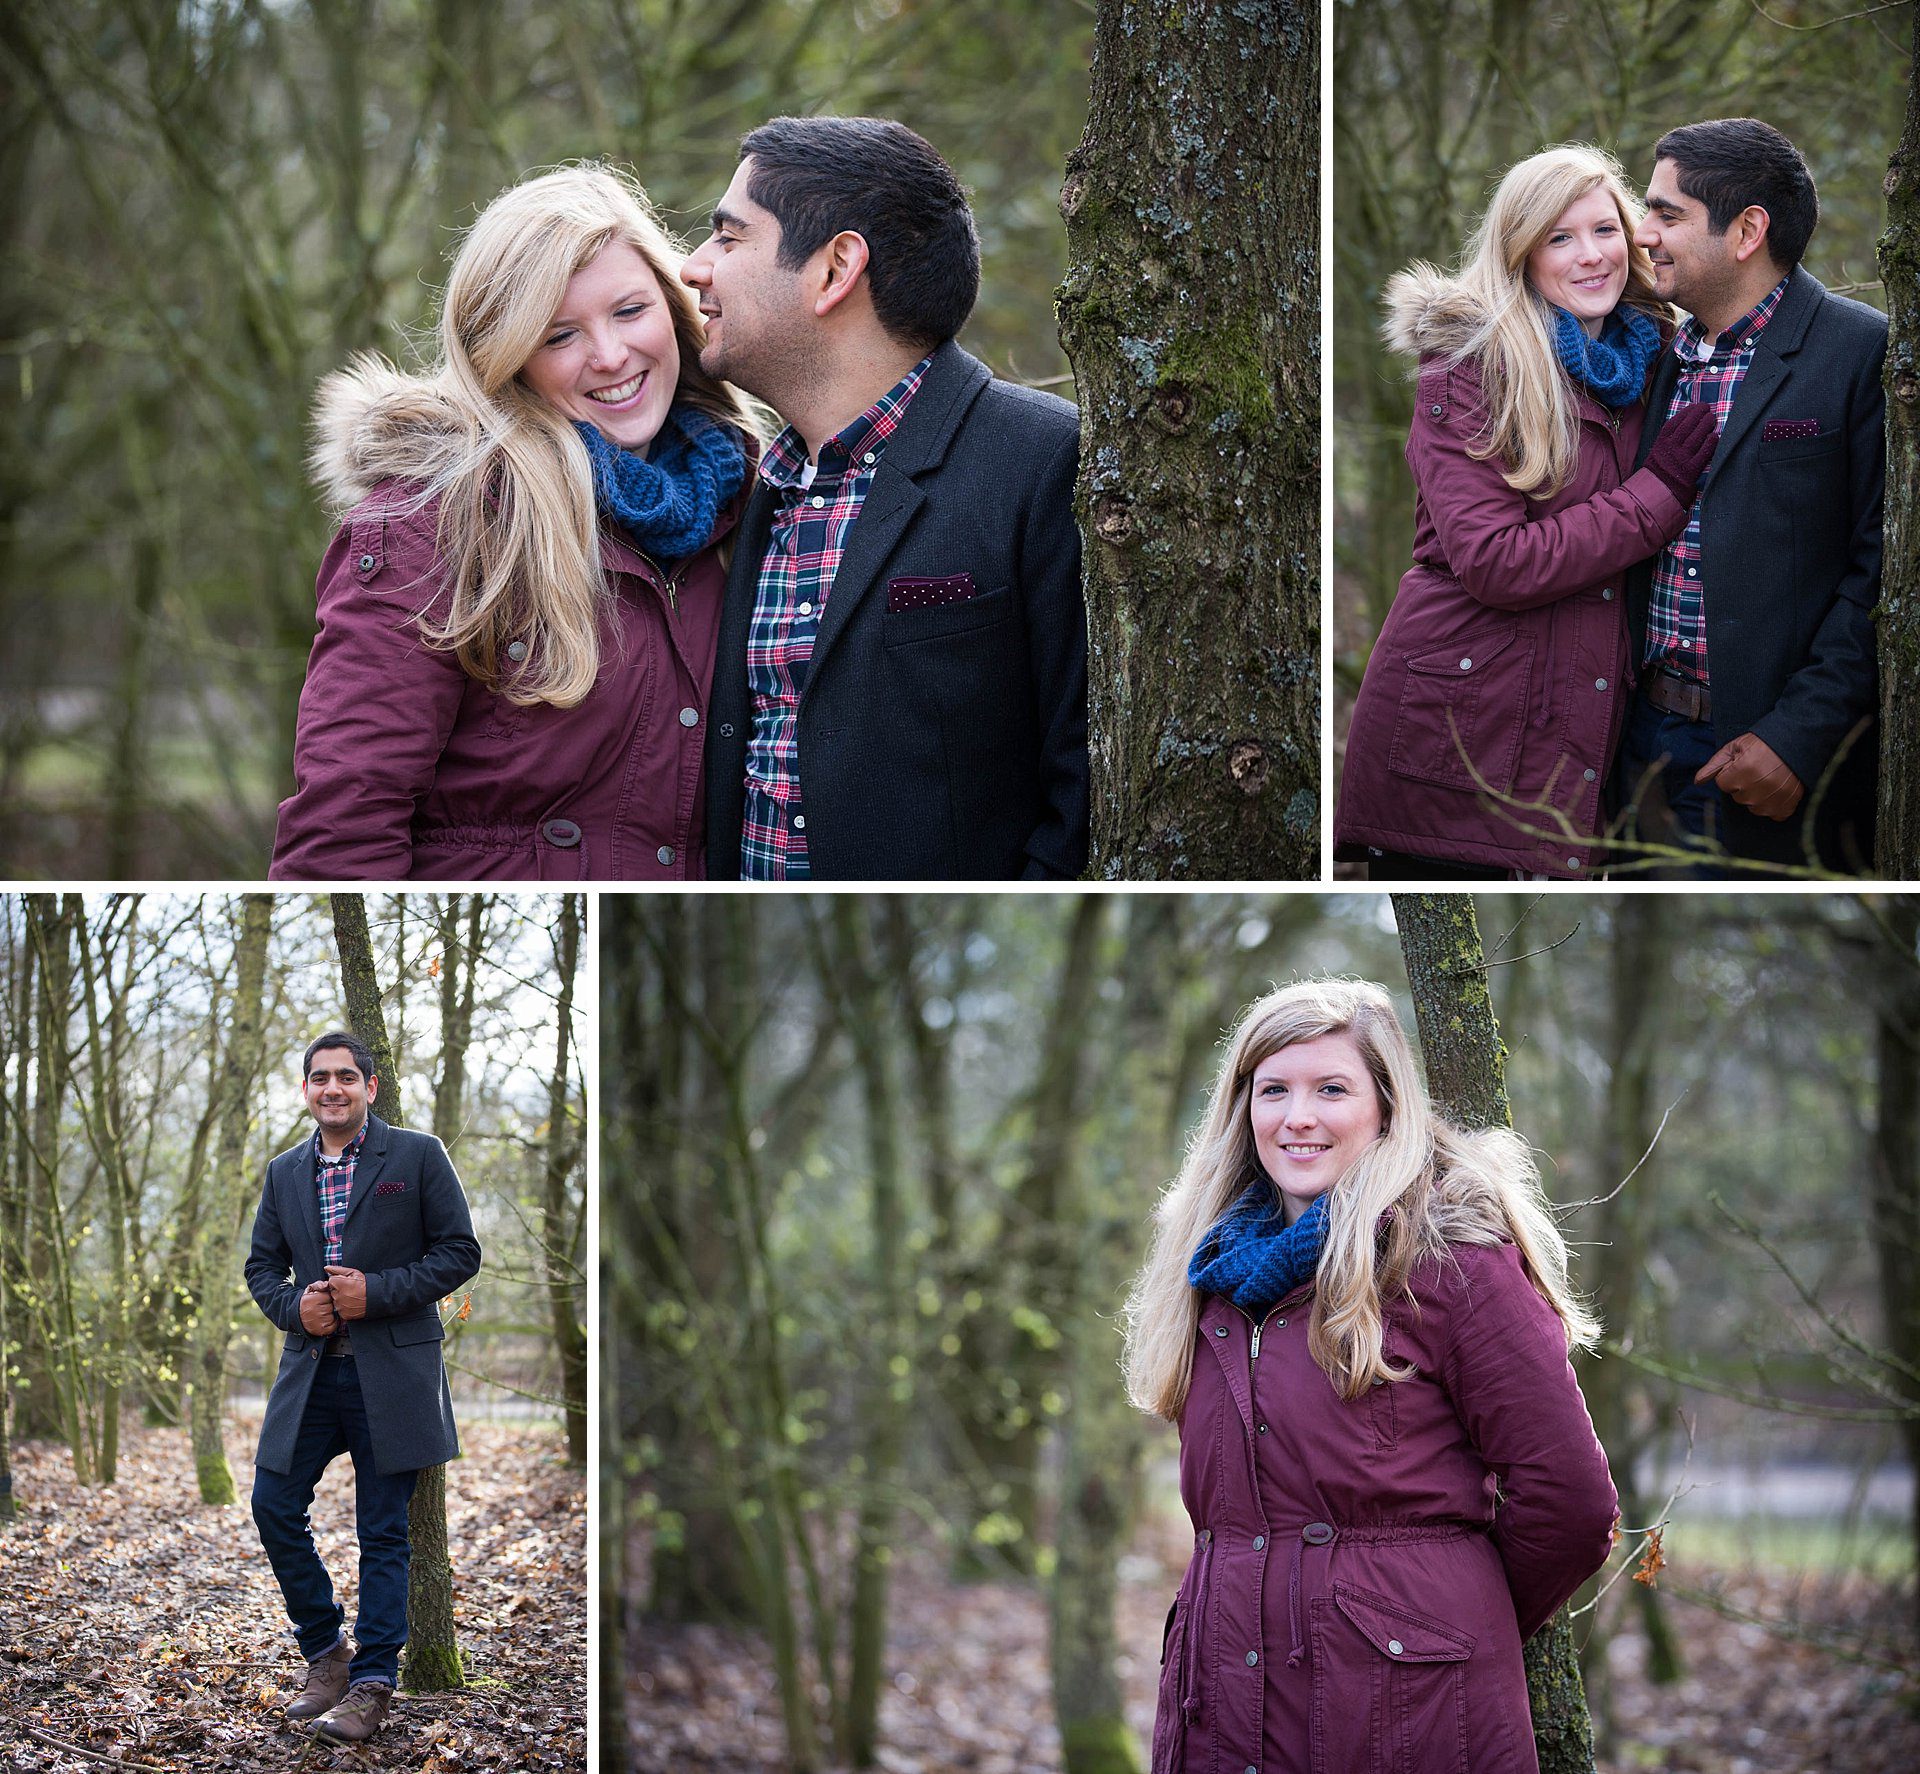 Catherine and Rohan's engagement shoot